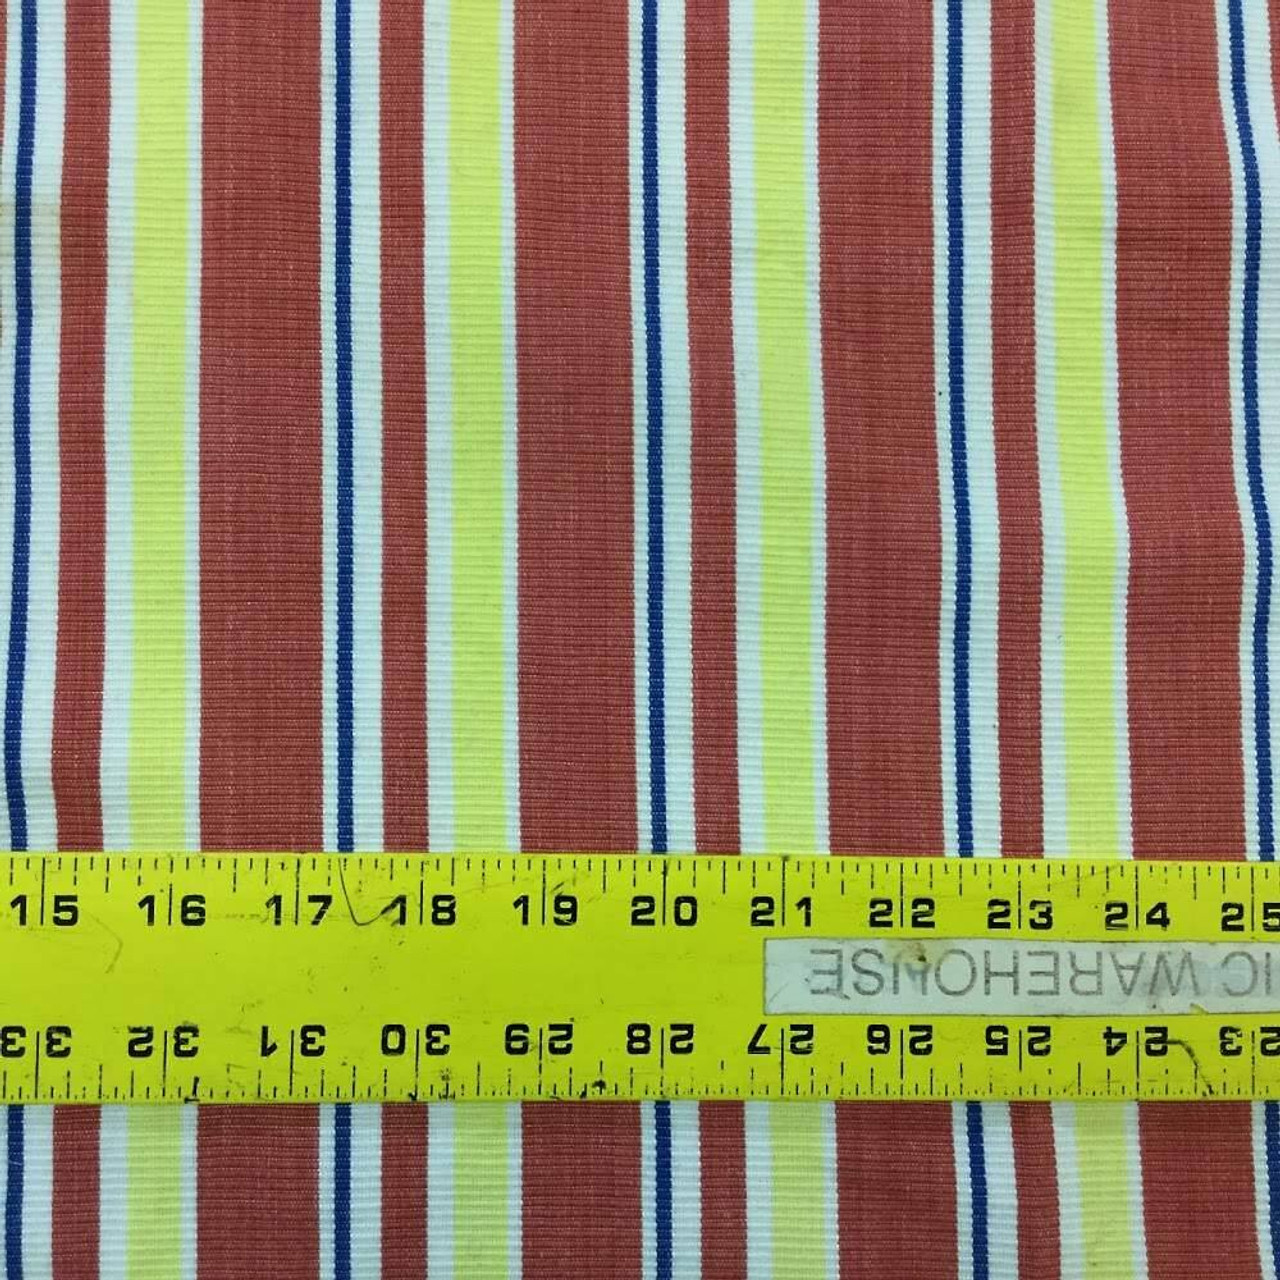 28-vintage Fabric by the Yard 40s 50s 60s Fabric Home Decor